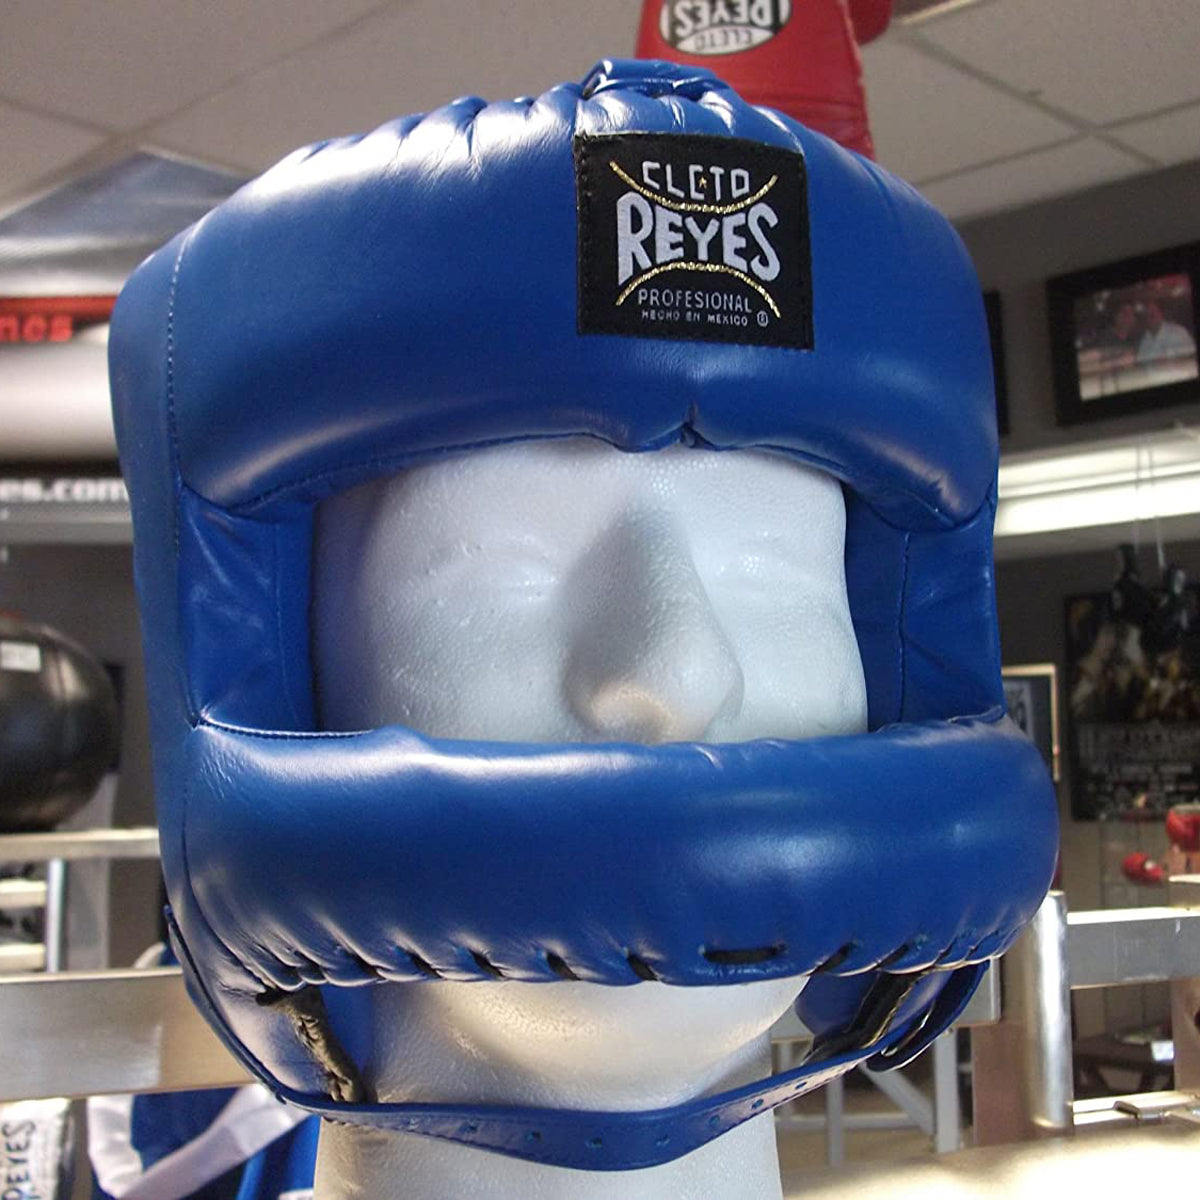 Cleto Reyes Redesigned Leather Boxing Headgear with Nylon Face Bar -Citrus Green Cleto Reyes